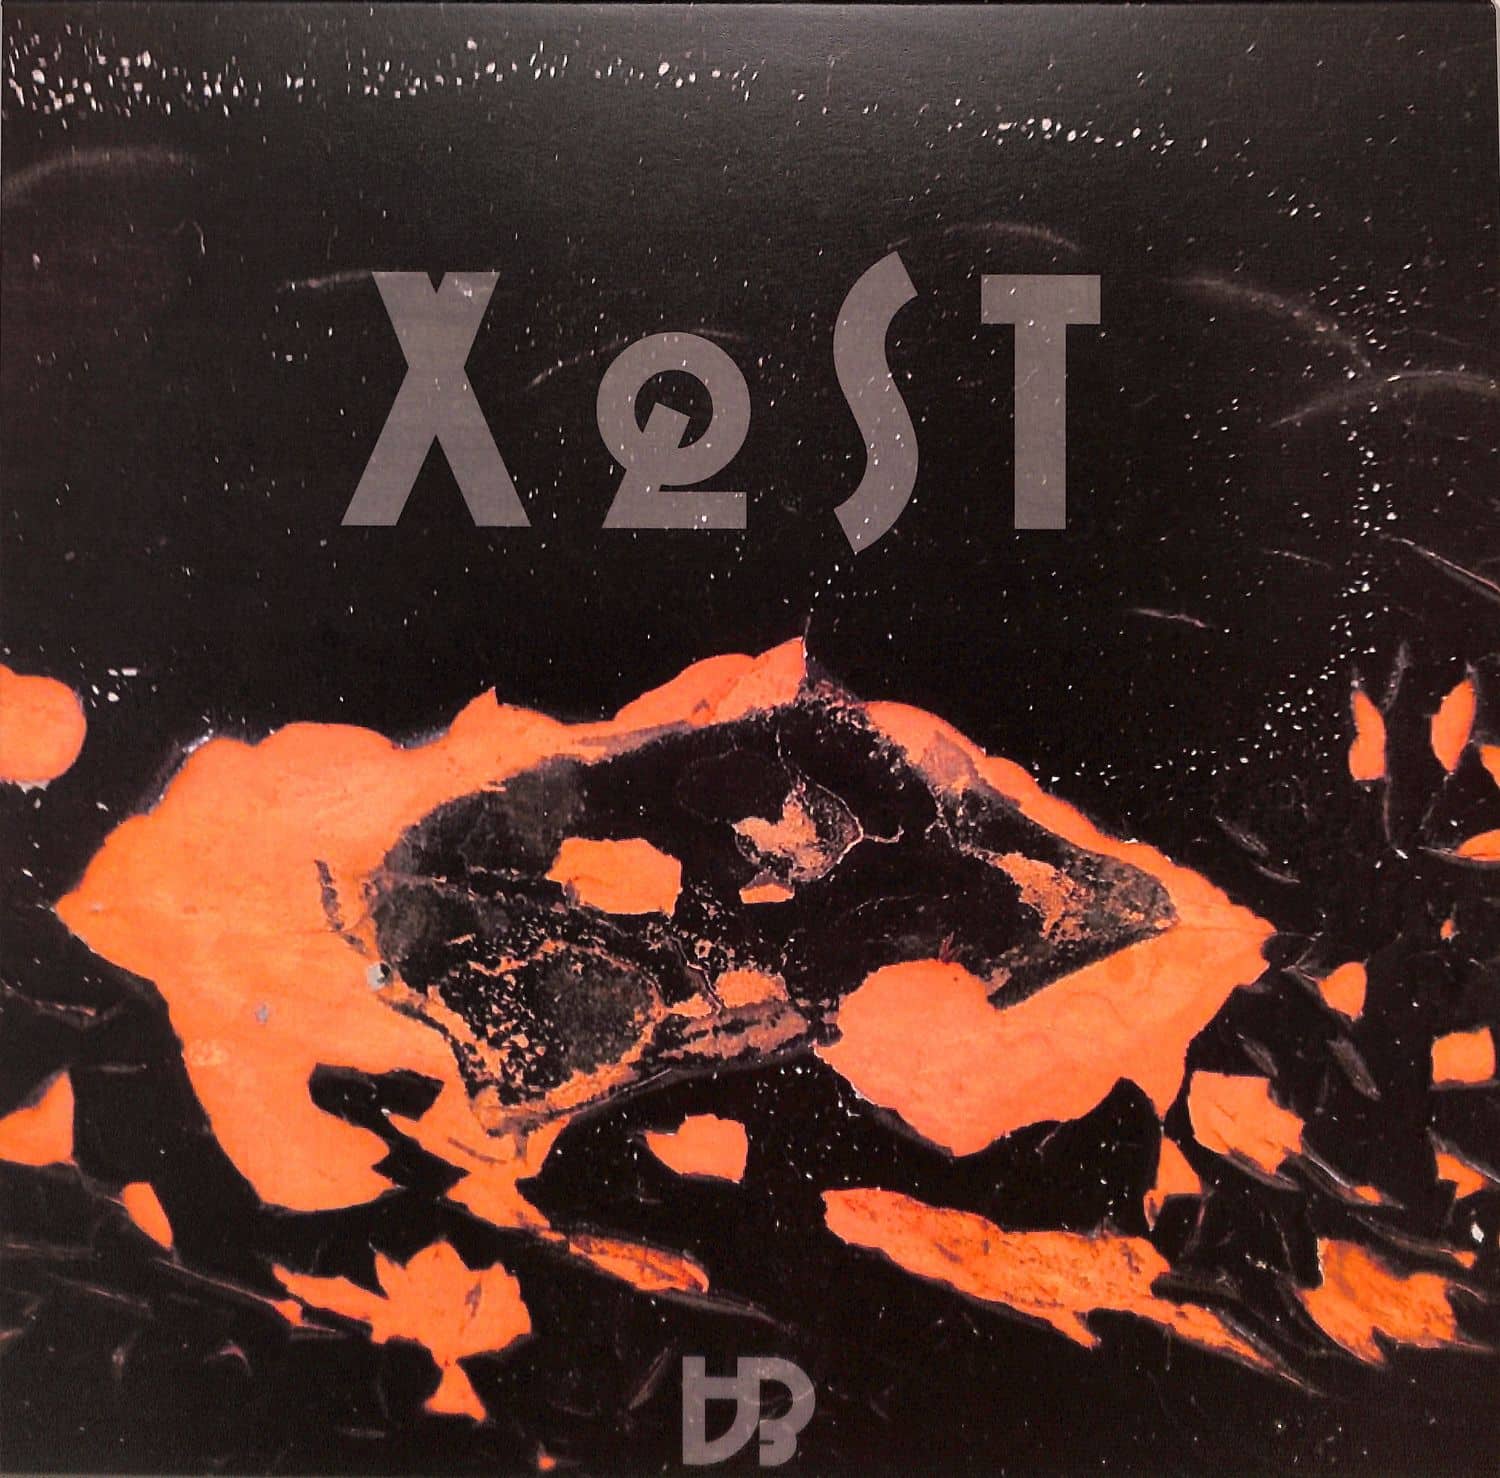 Exquisite Corpse Presents XQST - AE 